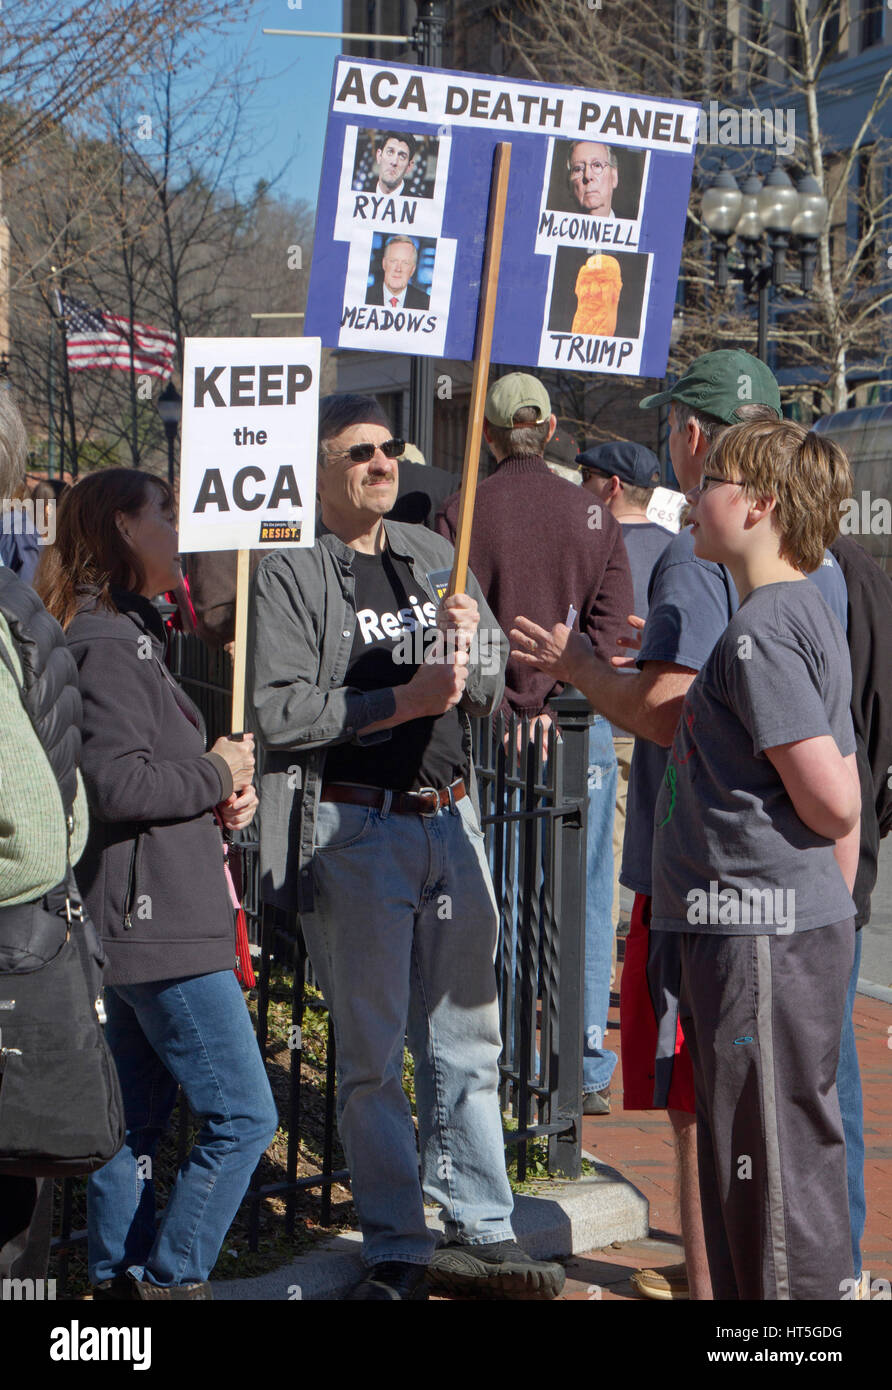 Asheville, North Carolina, USA - February 25, 2017:  Demonstrators at an Affordable Care Act (ACA) rally hold signs saying 'Keep the ACA' and 'ACA Dea Stock Photo